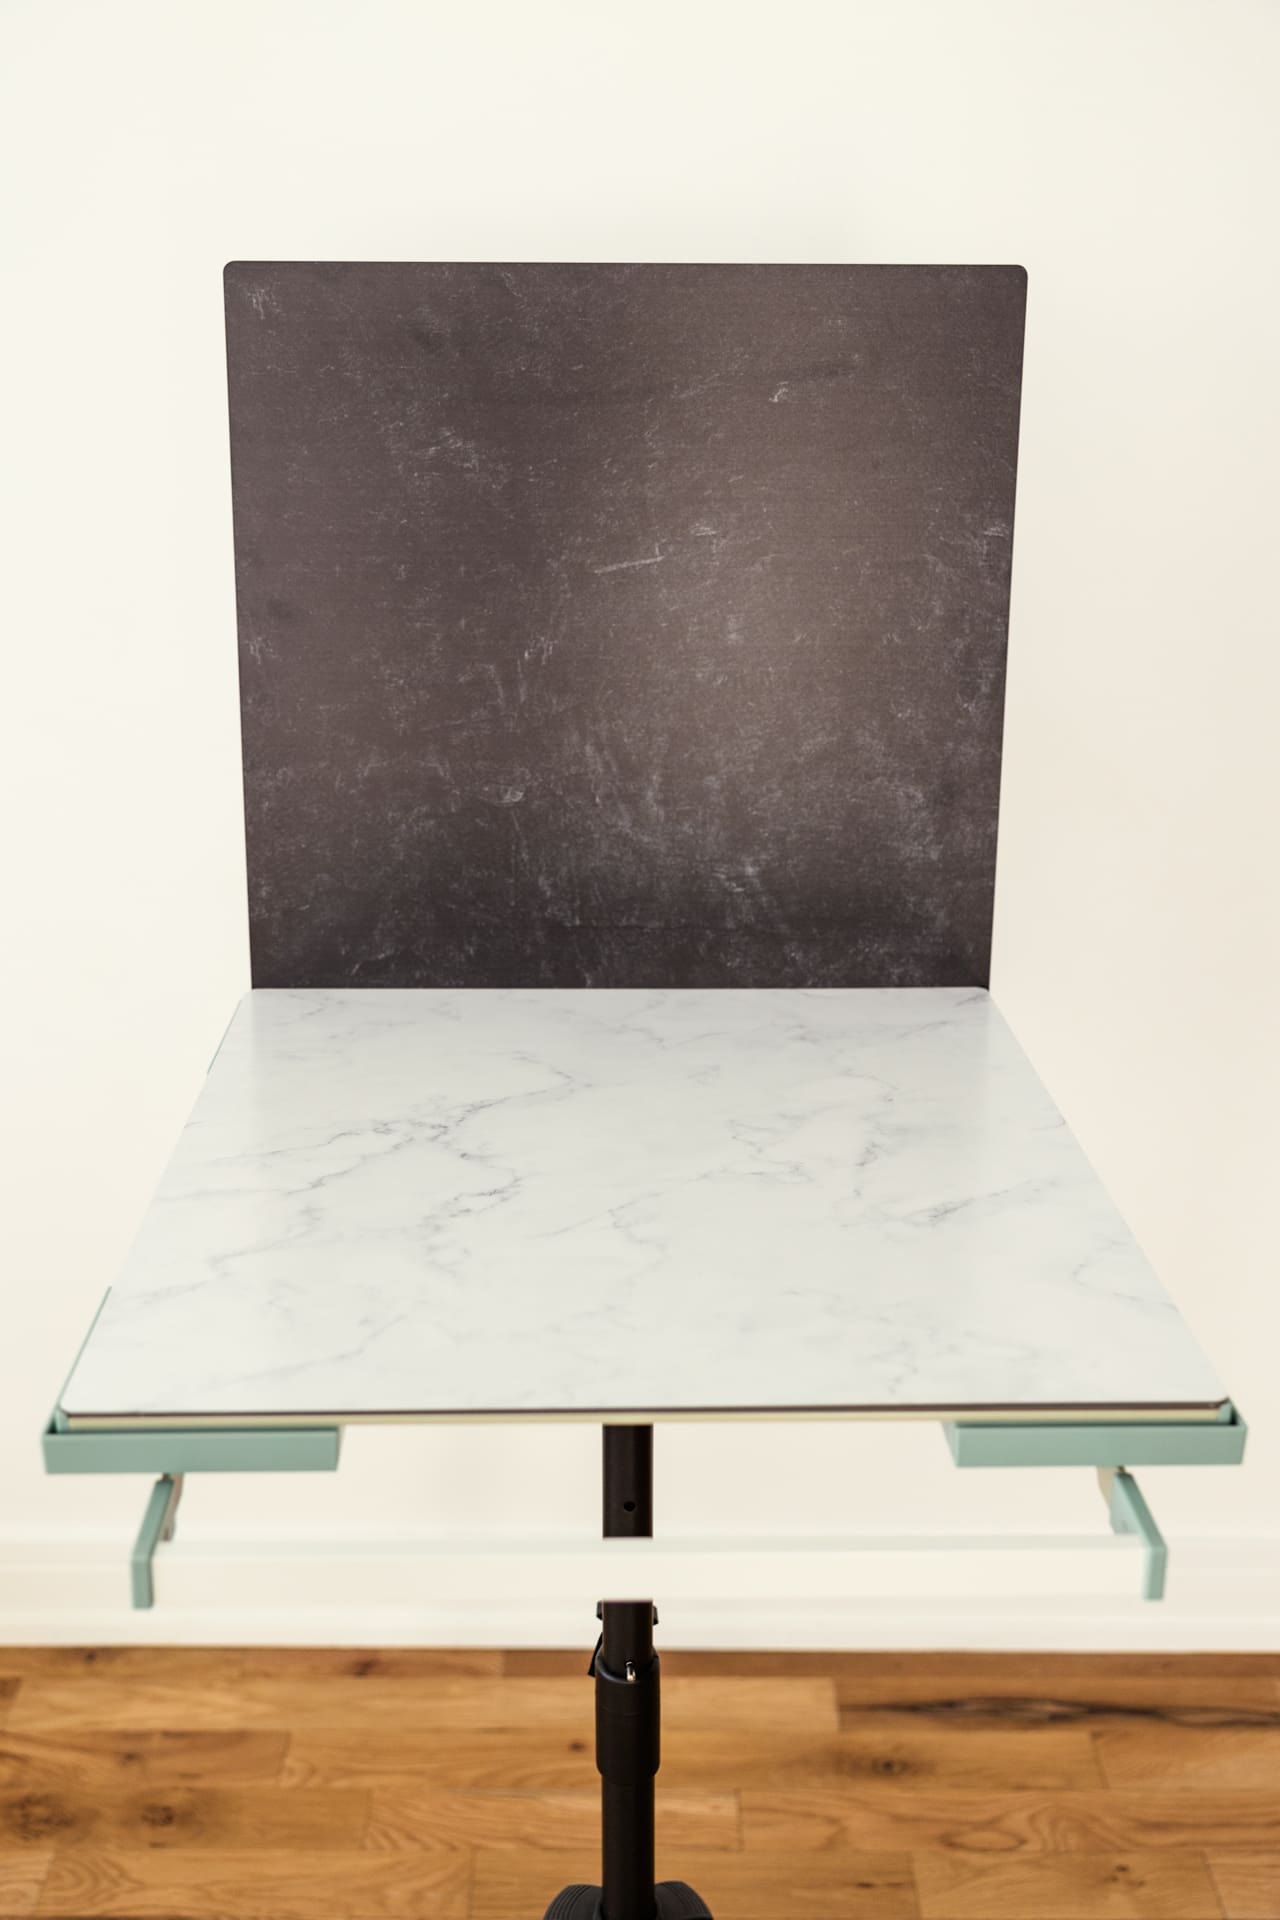 Replica Surfaces® Slate and White Marble set up at Chicago photography studio P&M Studio